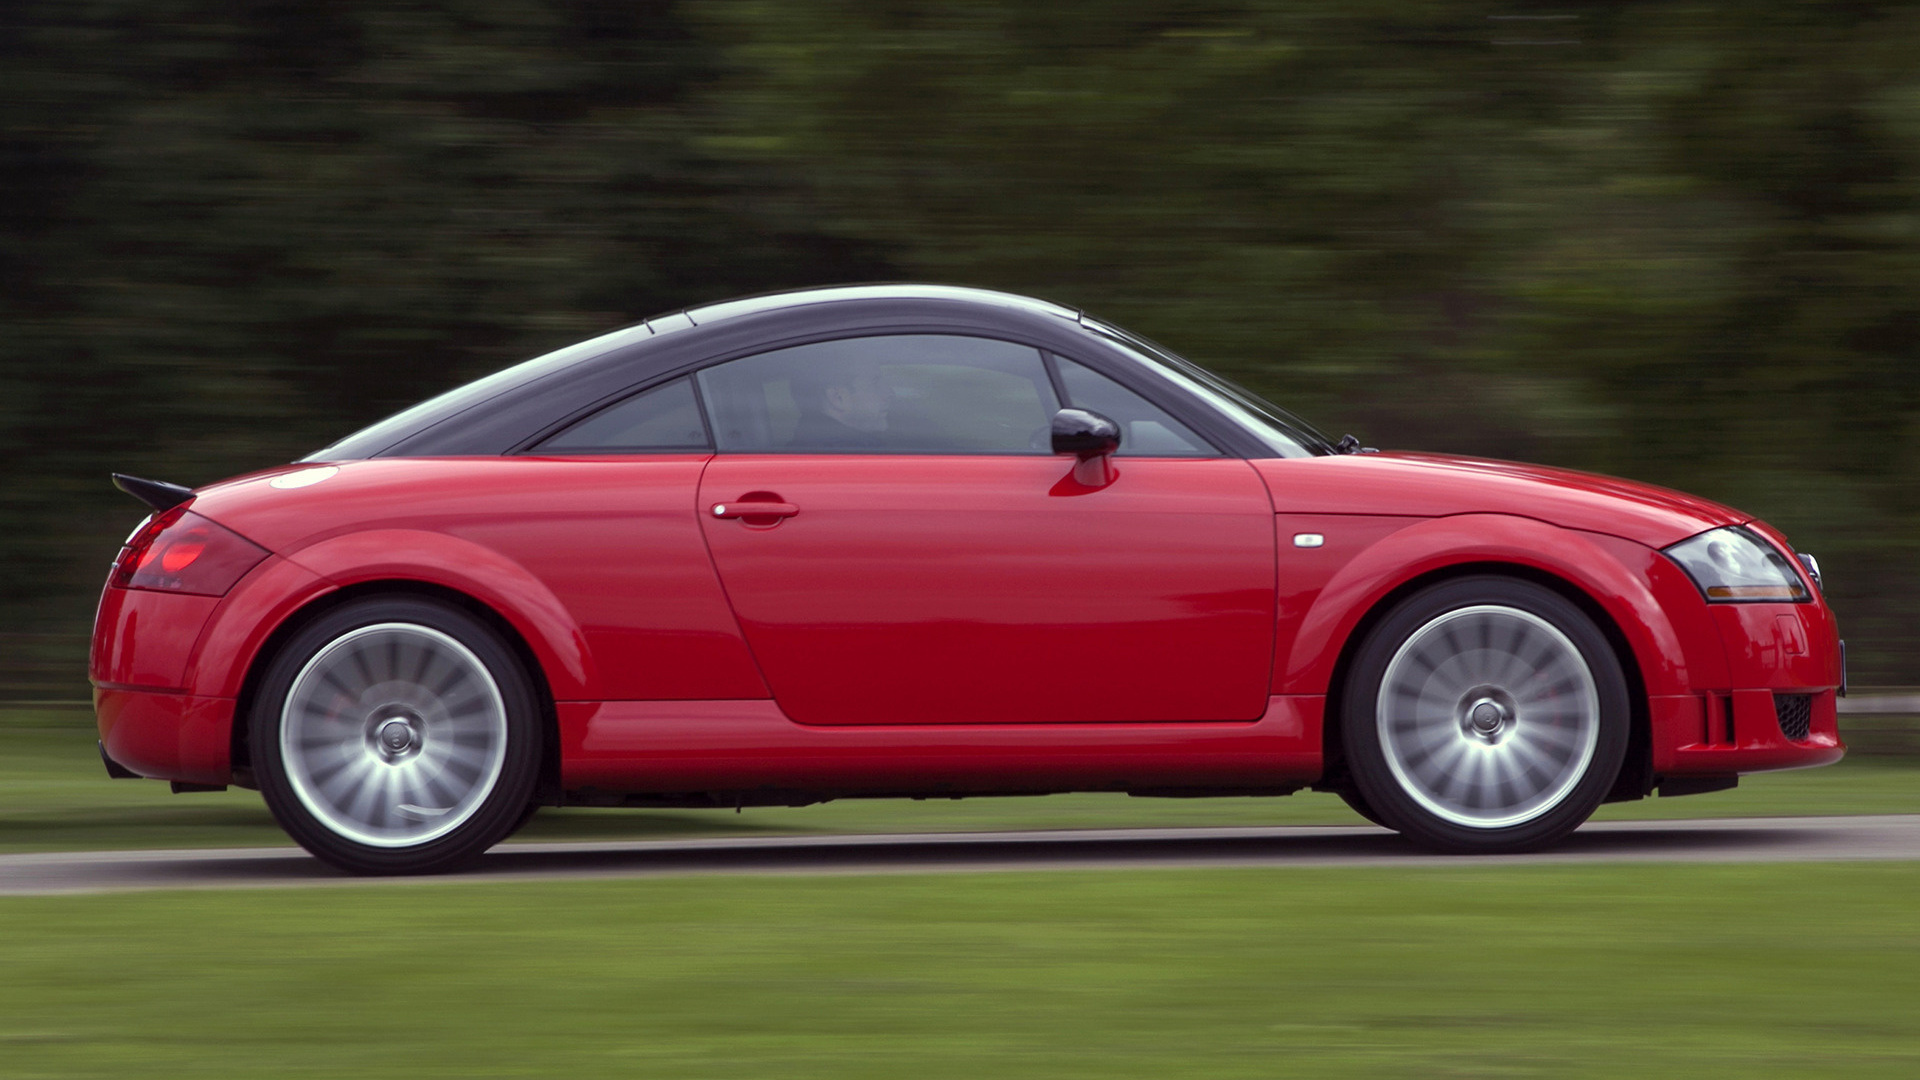 2005 Audi TT Coupe Sport (UK) - Wallpapers and HD Images ...